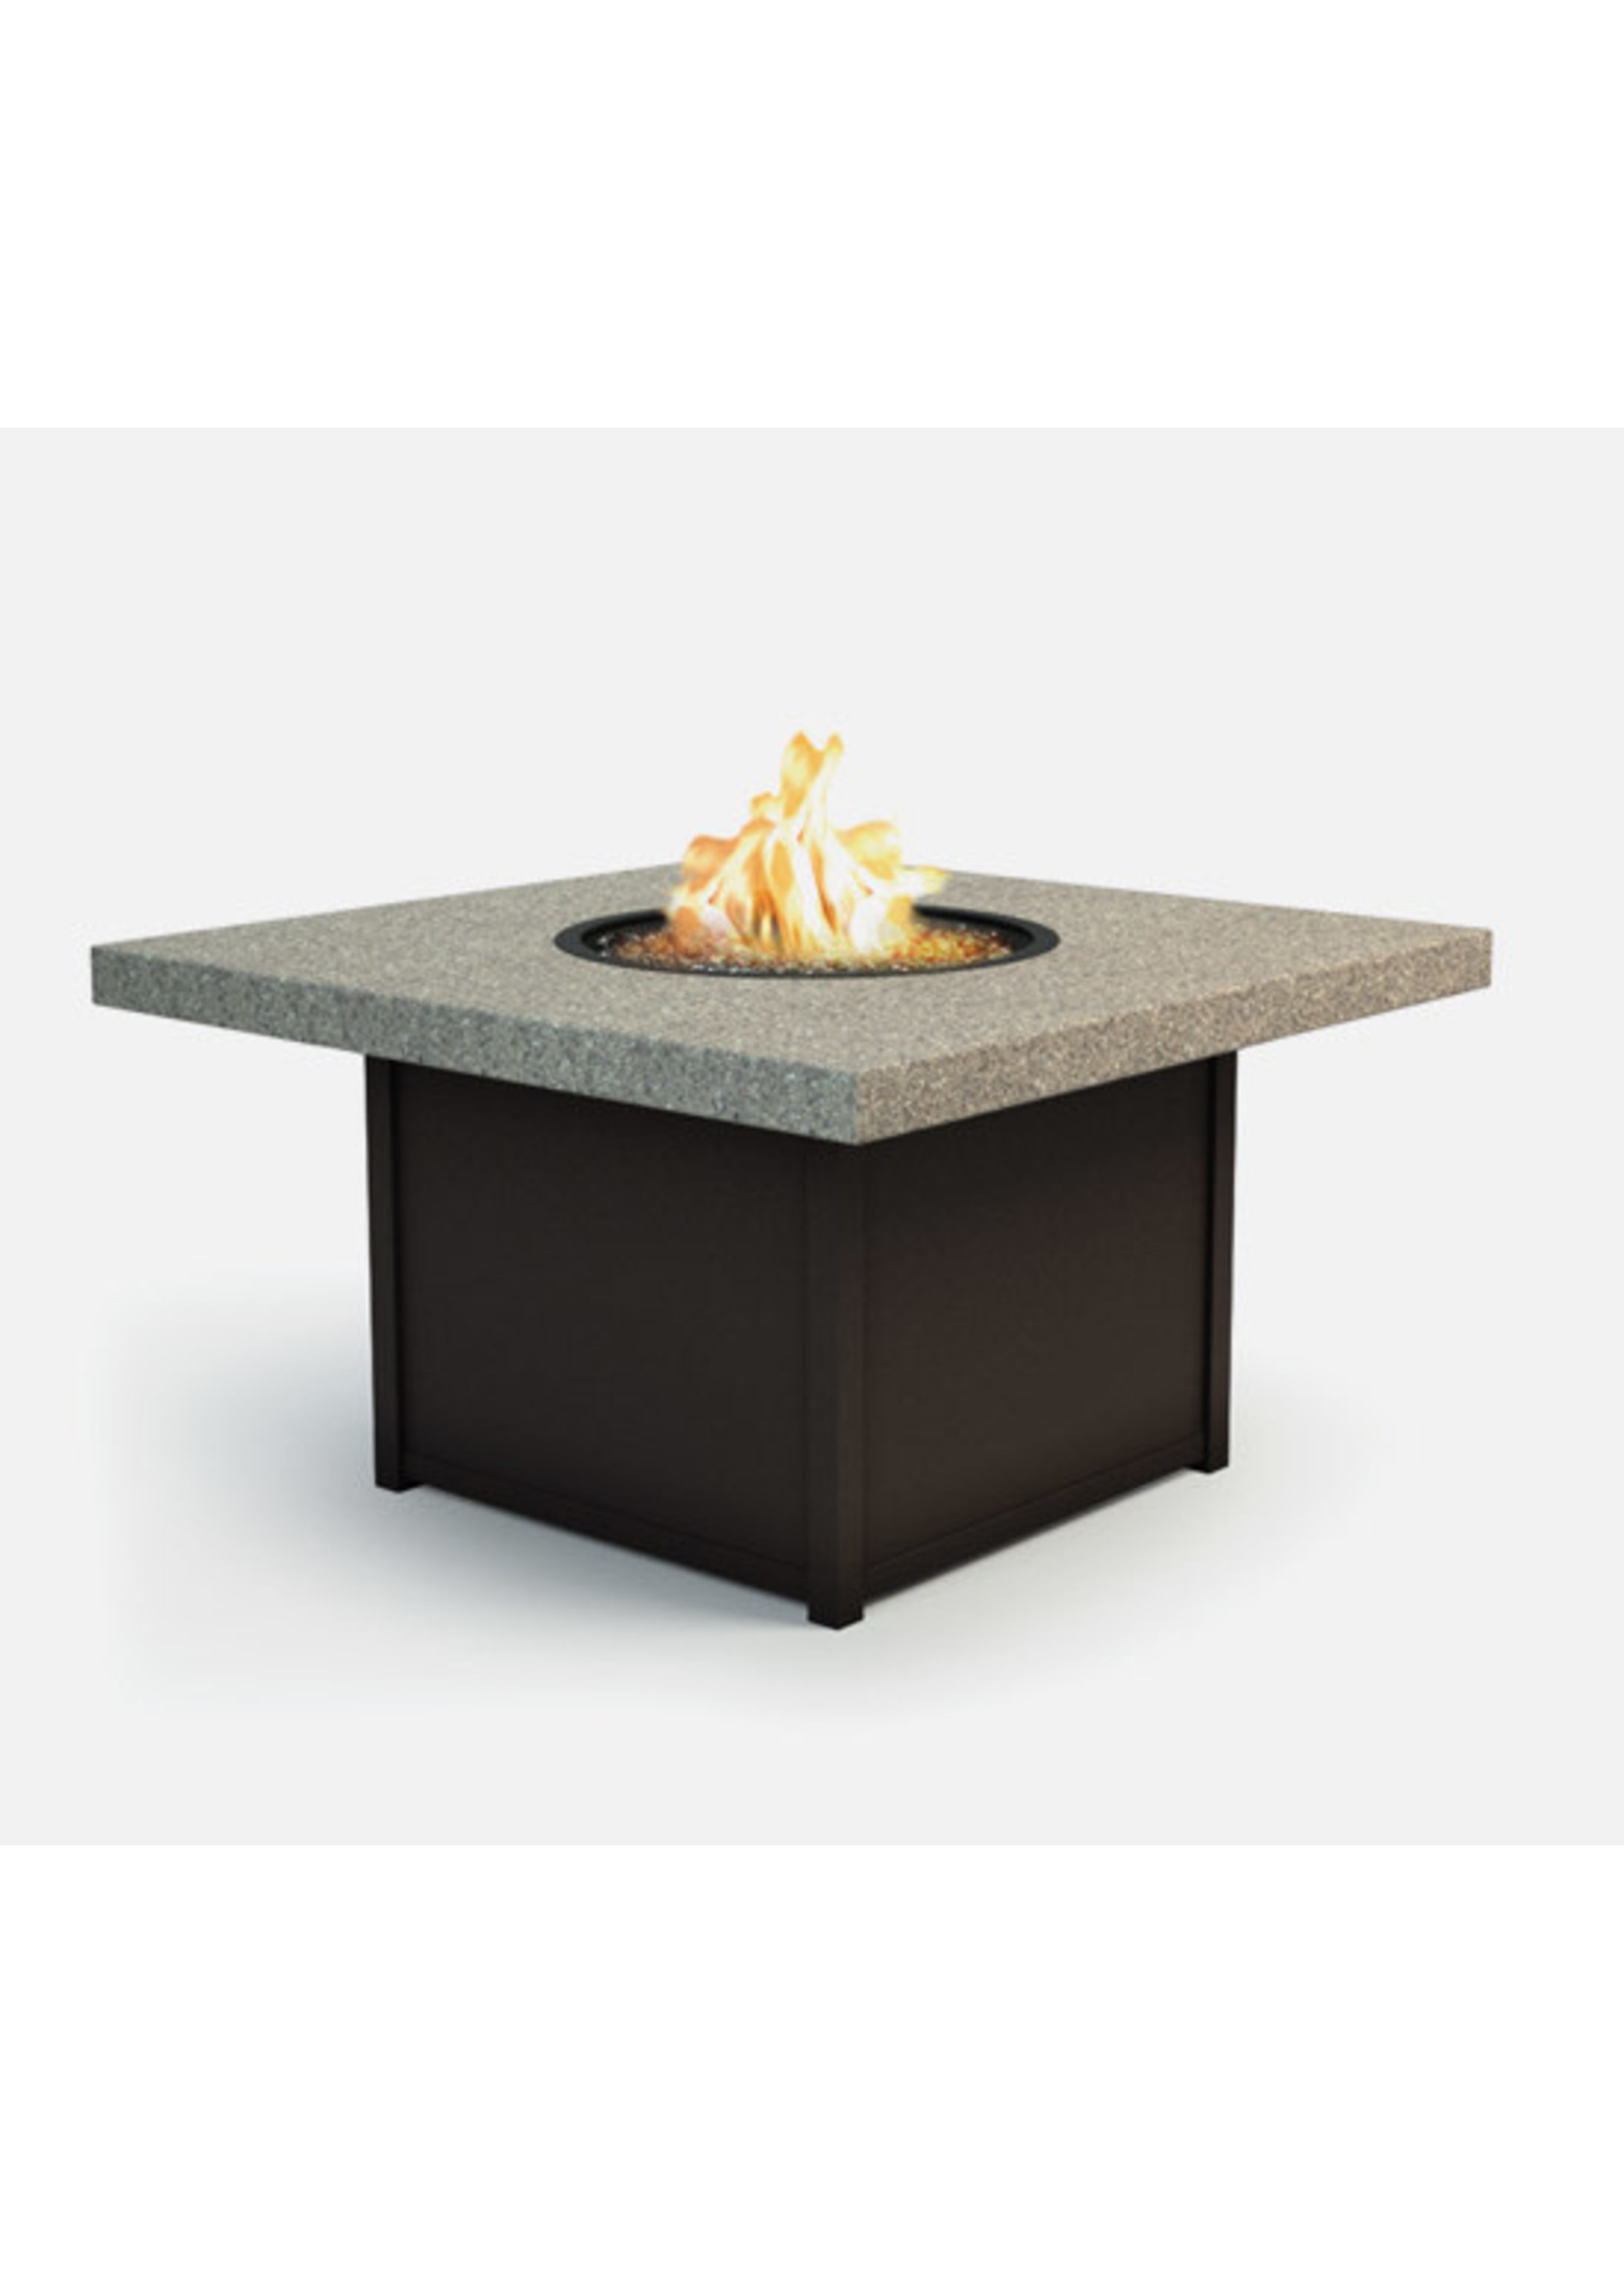 STONEGATE 42" SQUARE CHAT FIRE TABLE